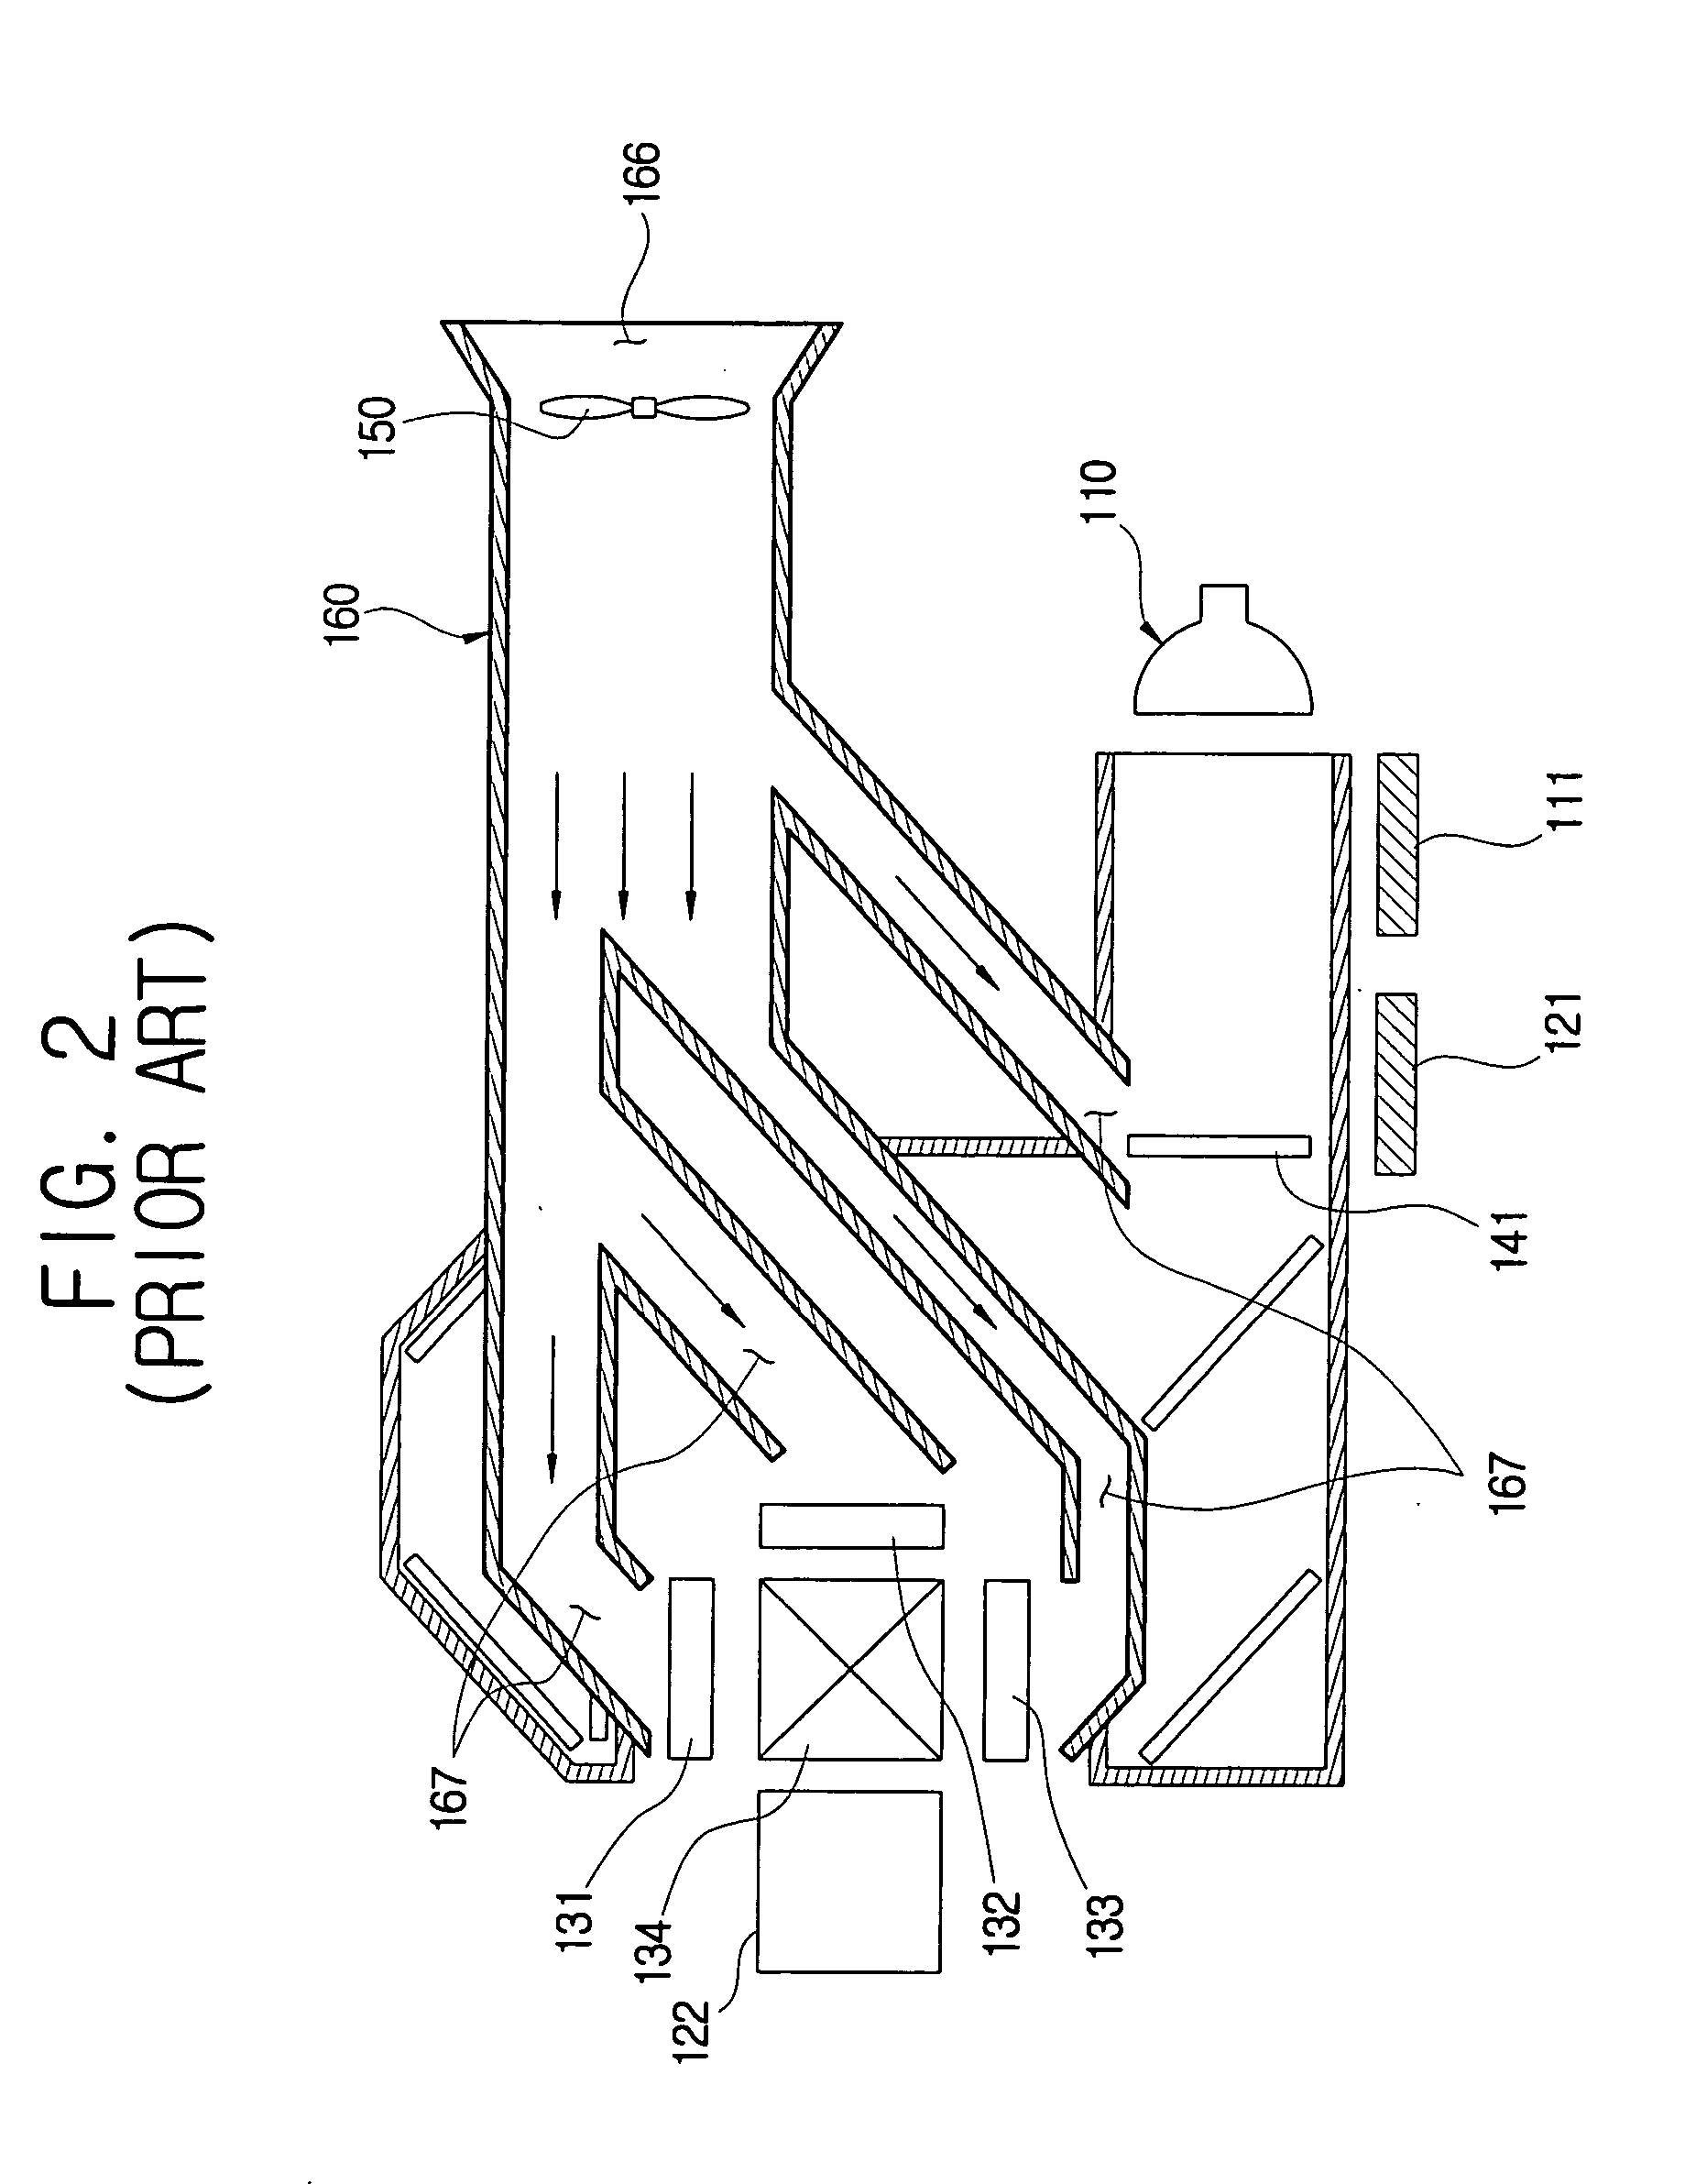 Projector having improved structure for cooling optical system